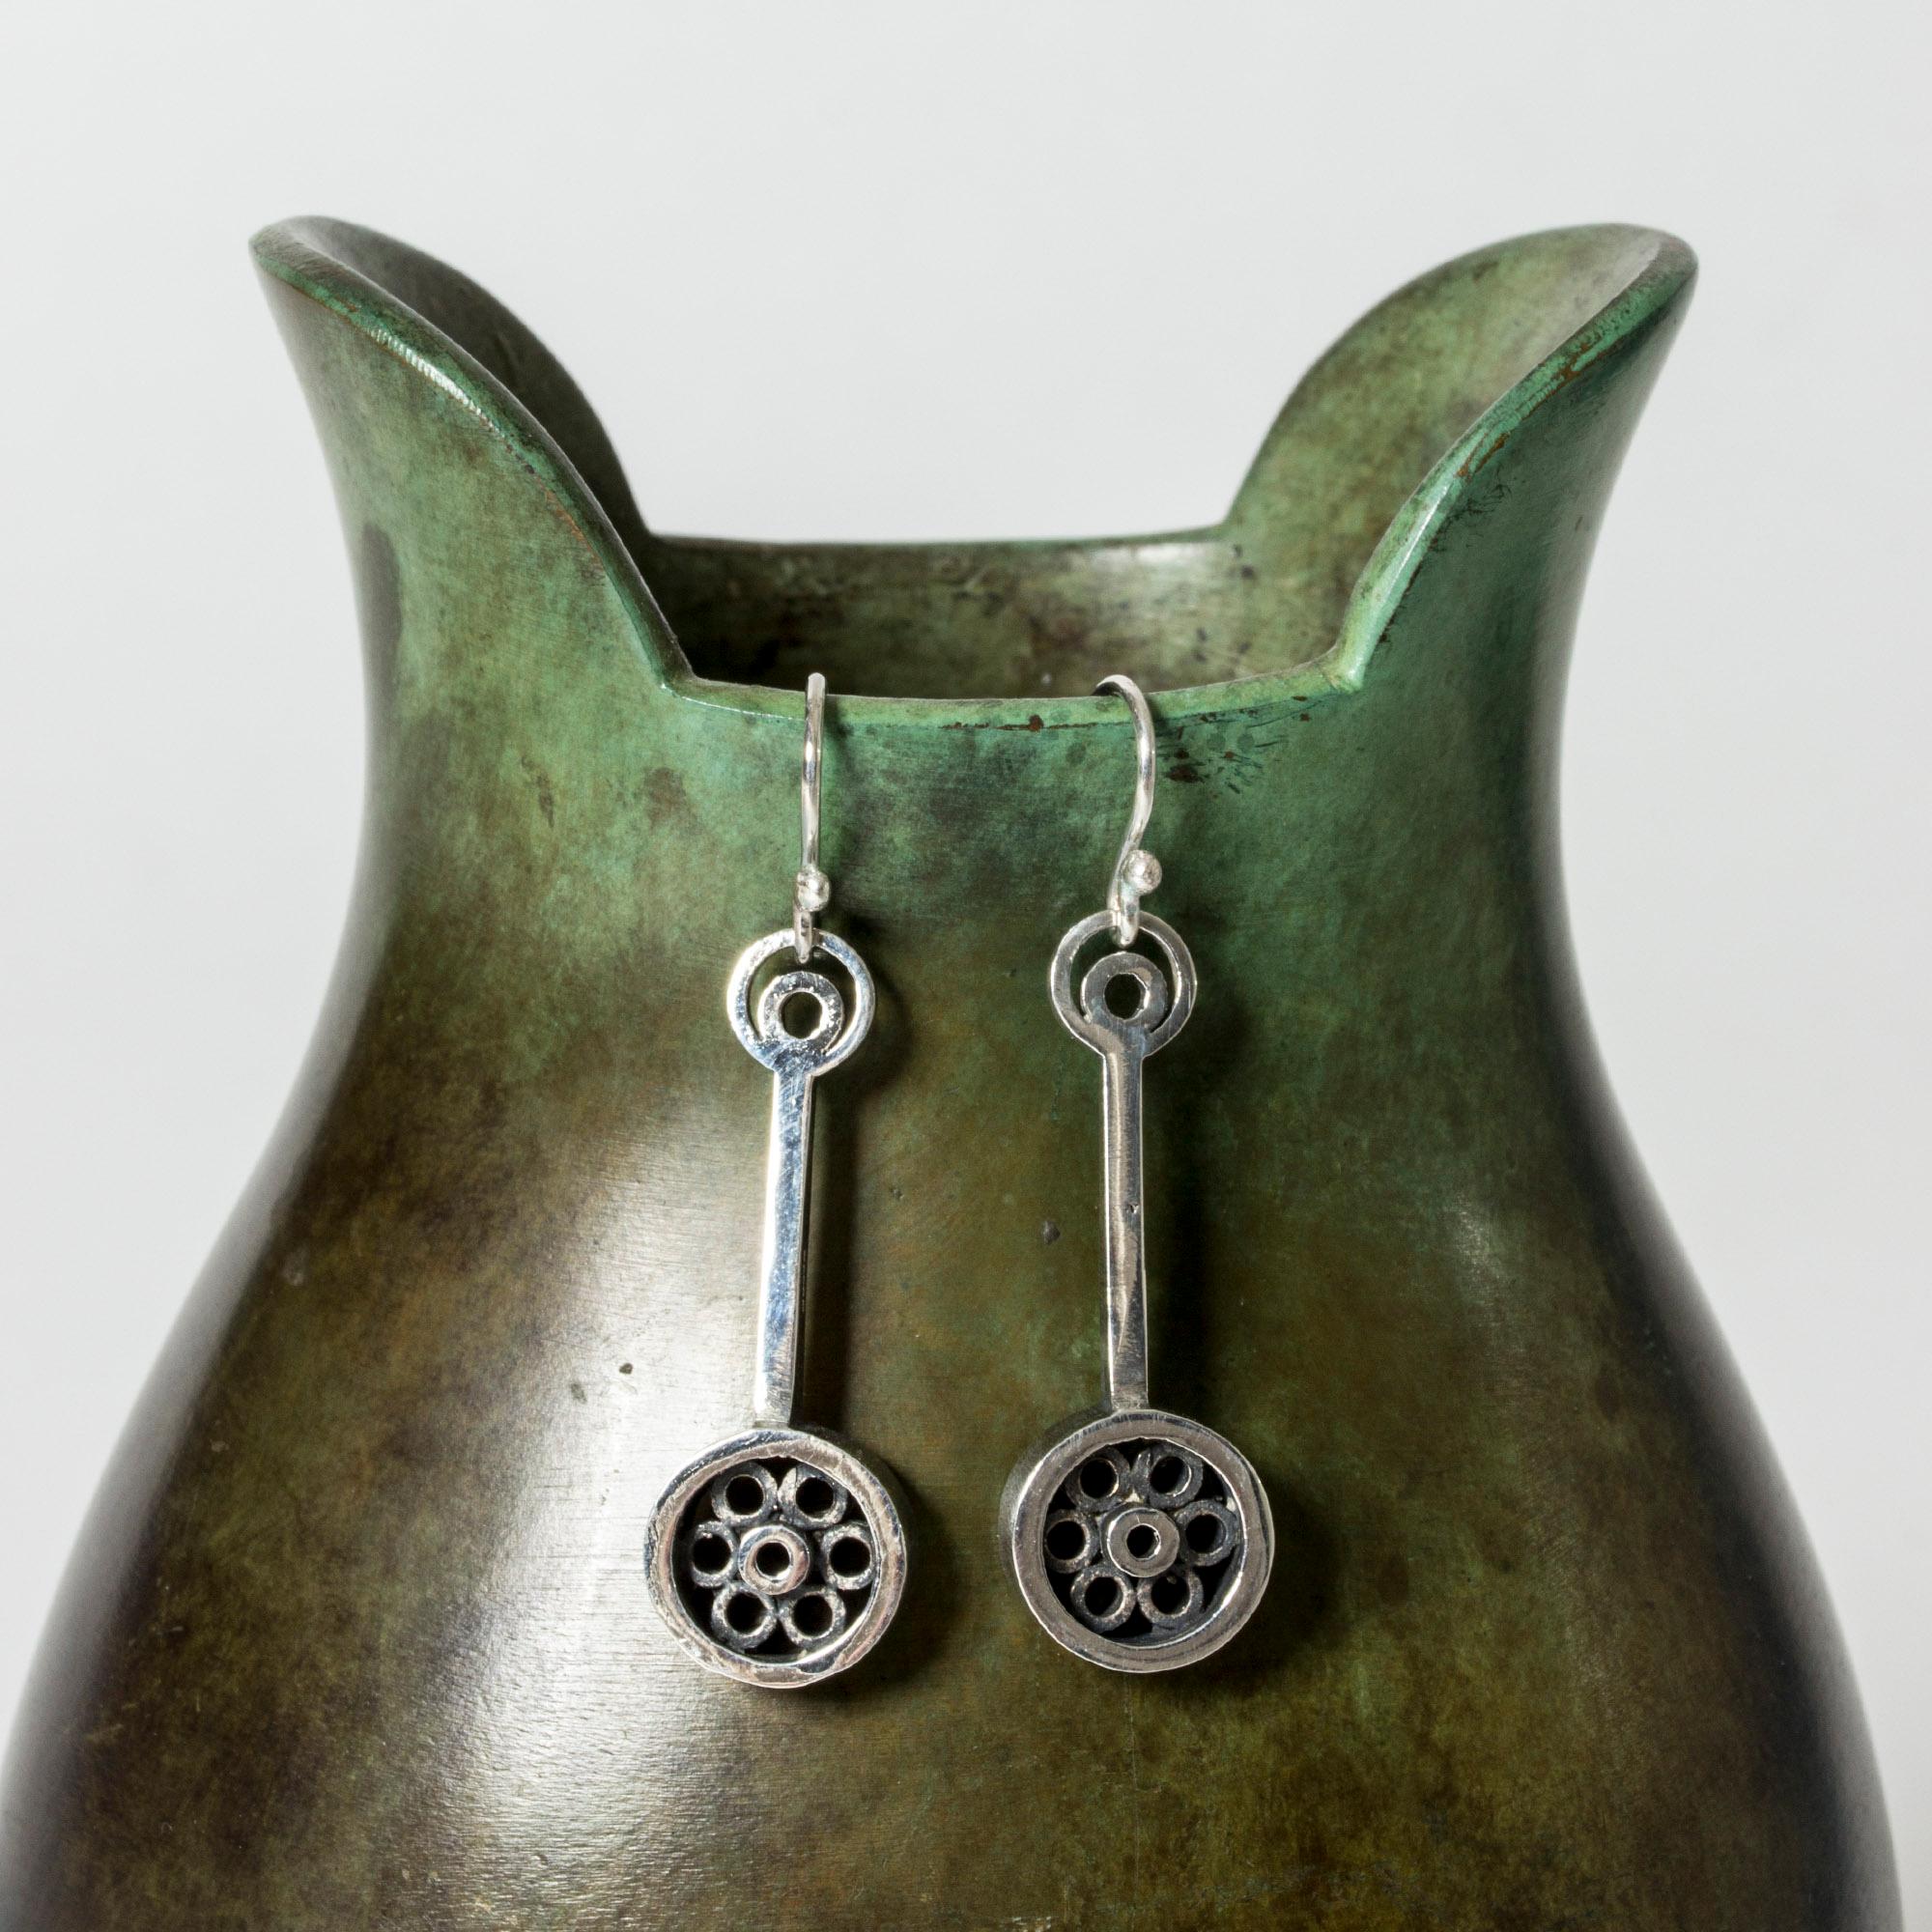 Pair of lovely silver earrings by Gudmund Elvestad, in a cool, graphic design with a pattern of circles.

Original screw mechanism with hallmarks will come with the earrings.